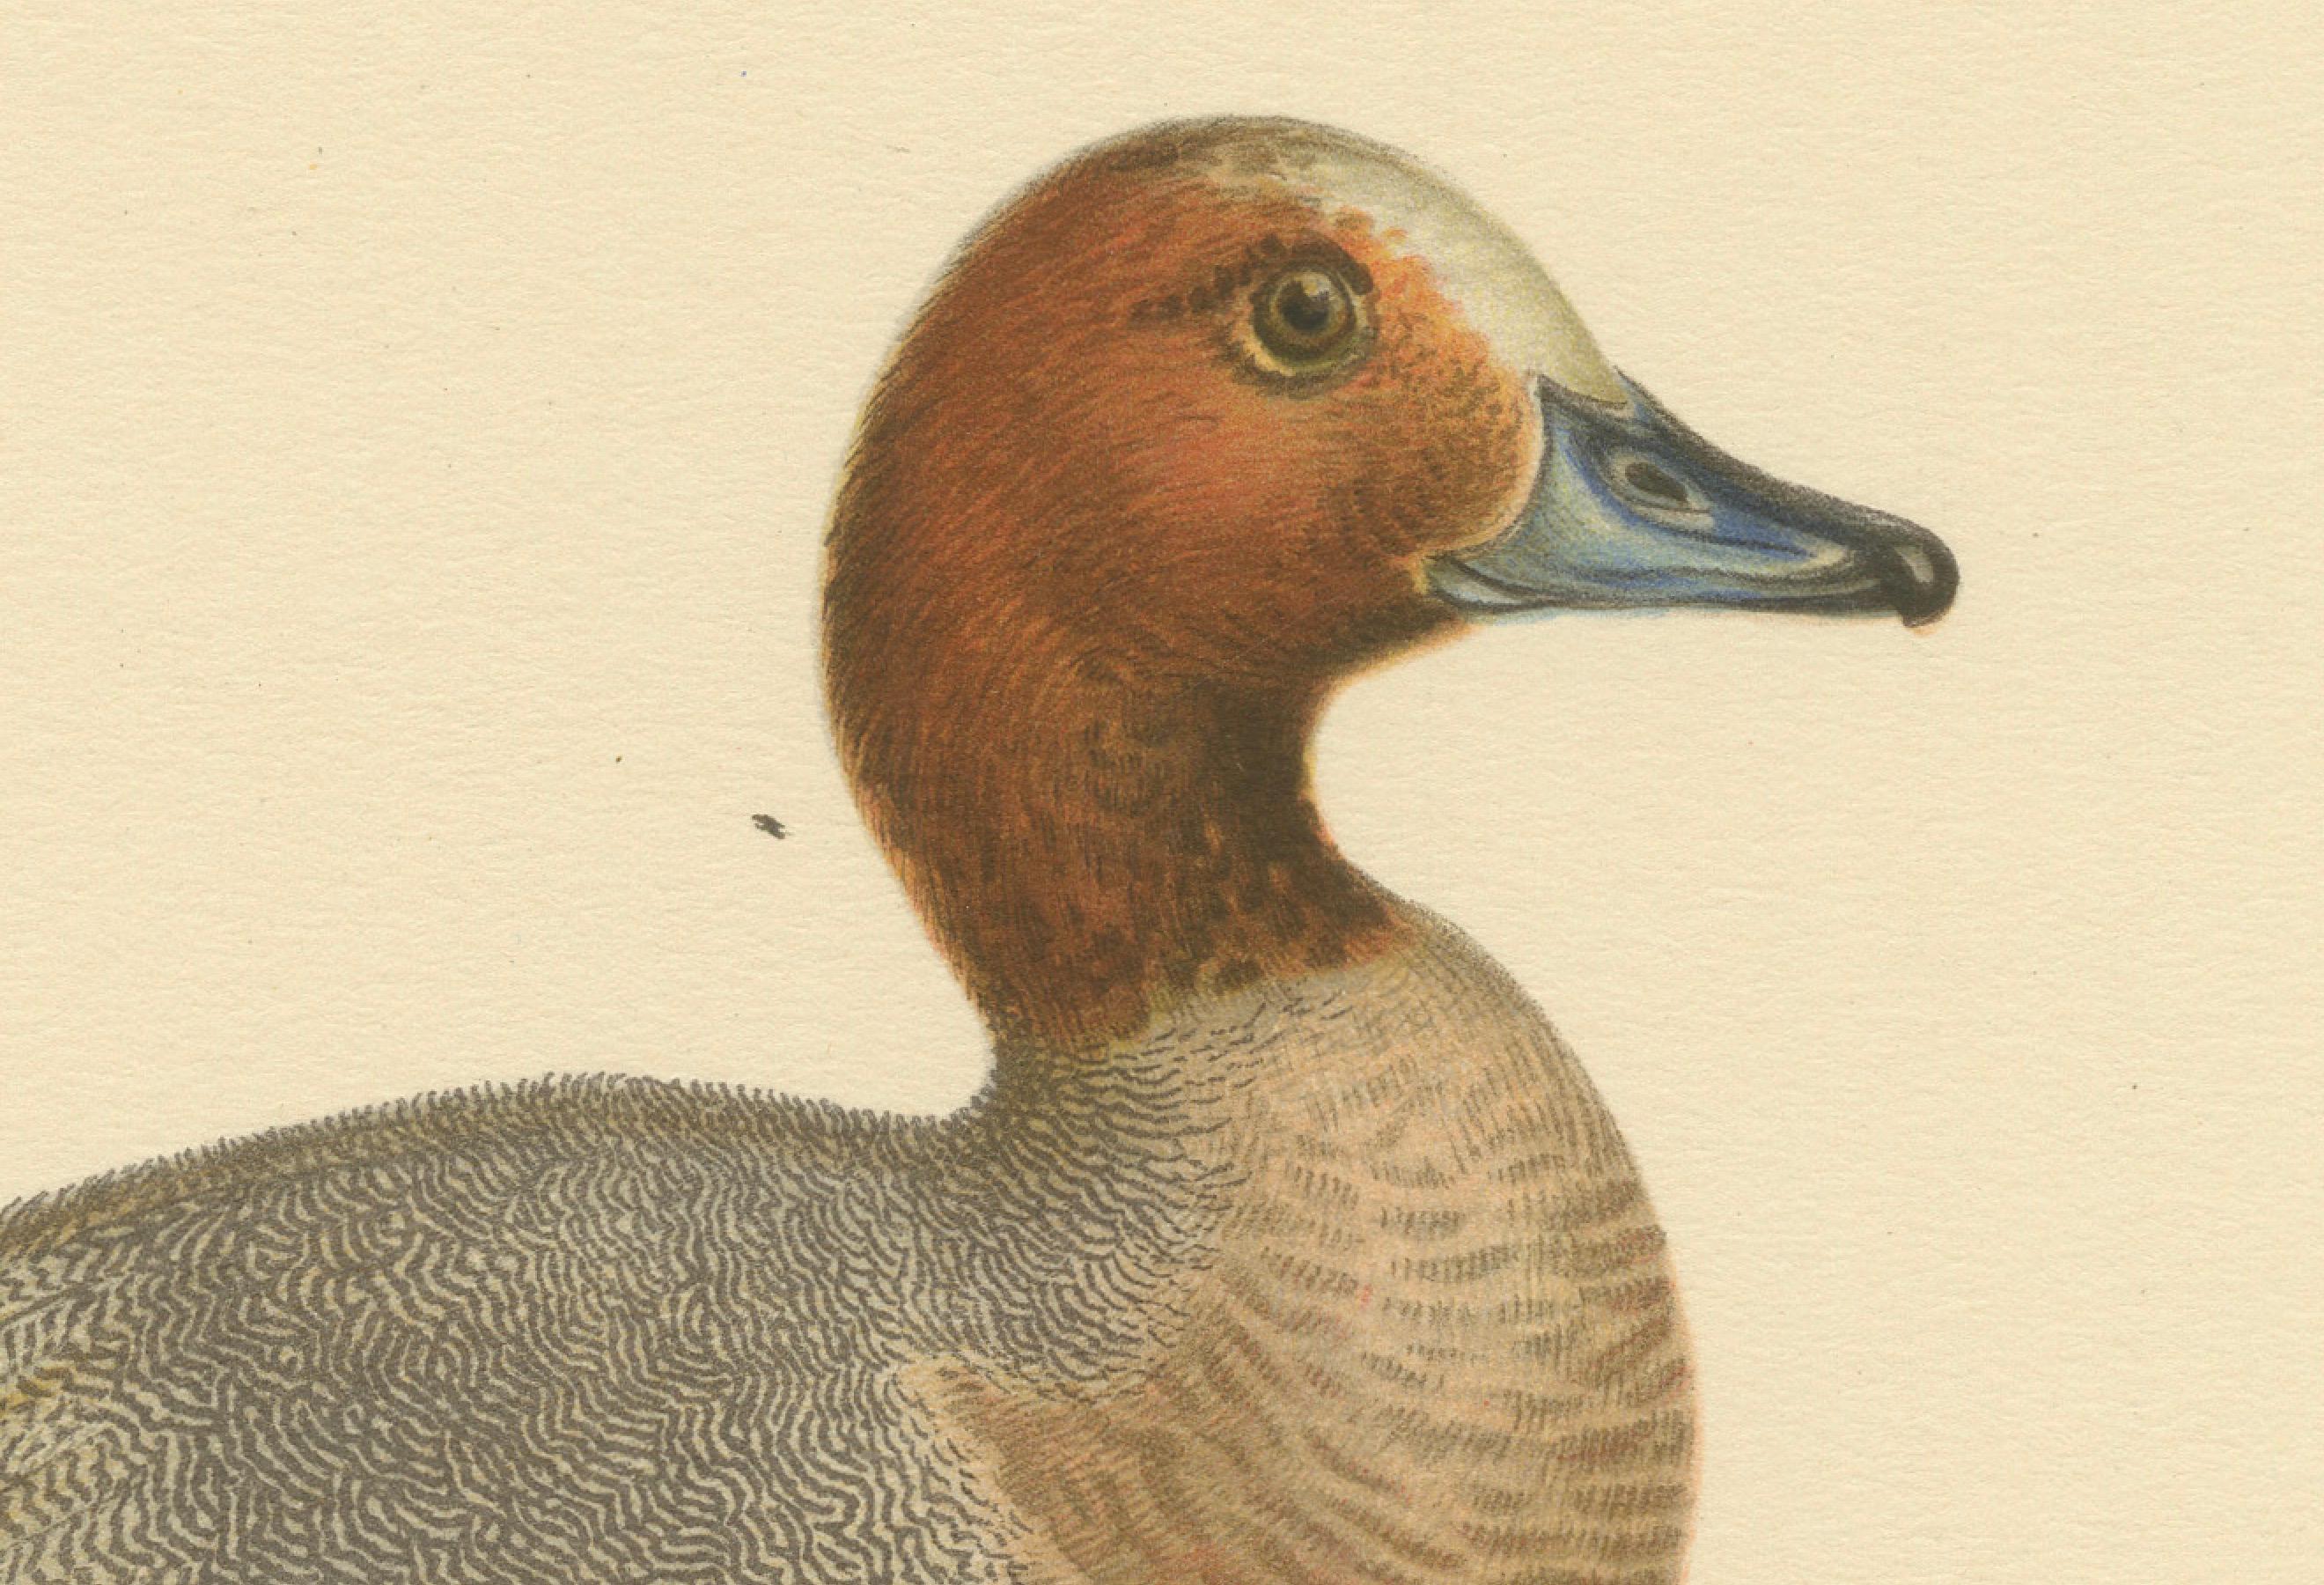 The image features a detailed and naturalistic representation of the Eurasian wigeon, scientifically named 'Anas (Mareca) Penelope'. This duck is characterized by its russet head and neck, pale blue bill with a black tip, and a distinctive cream